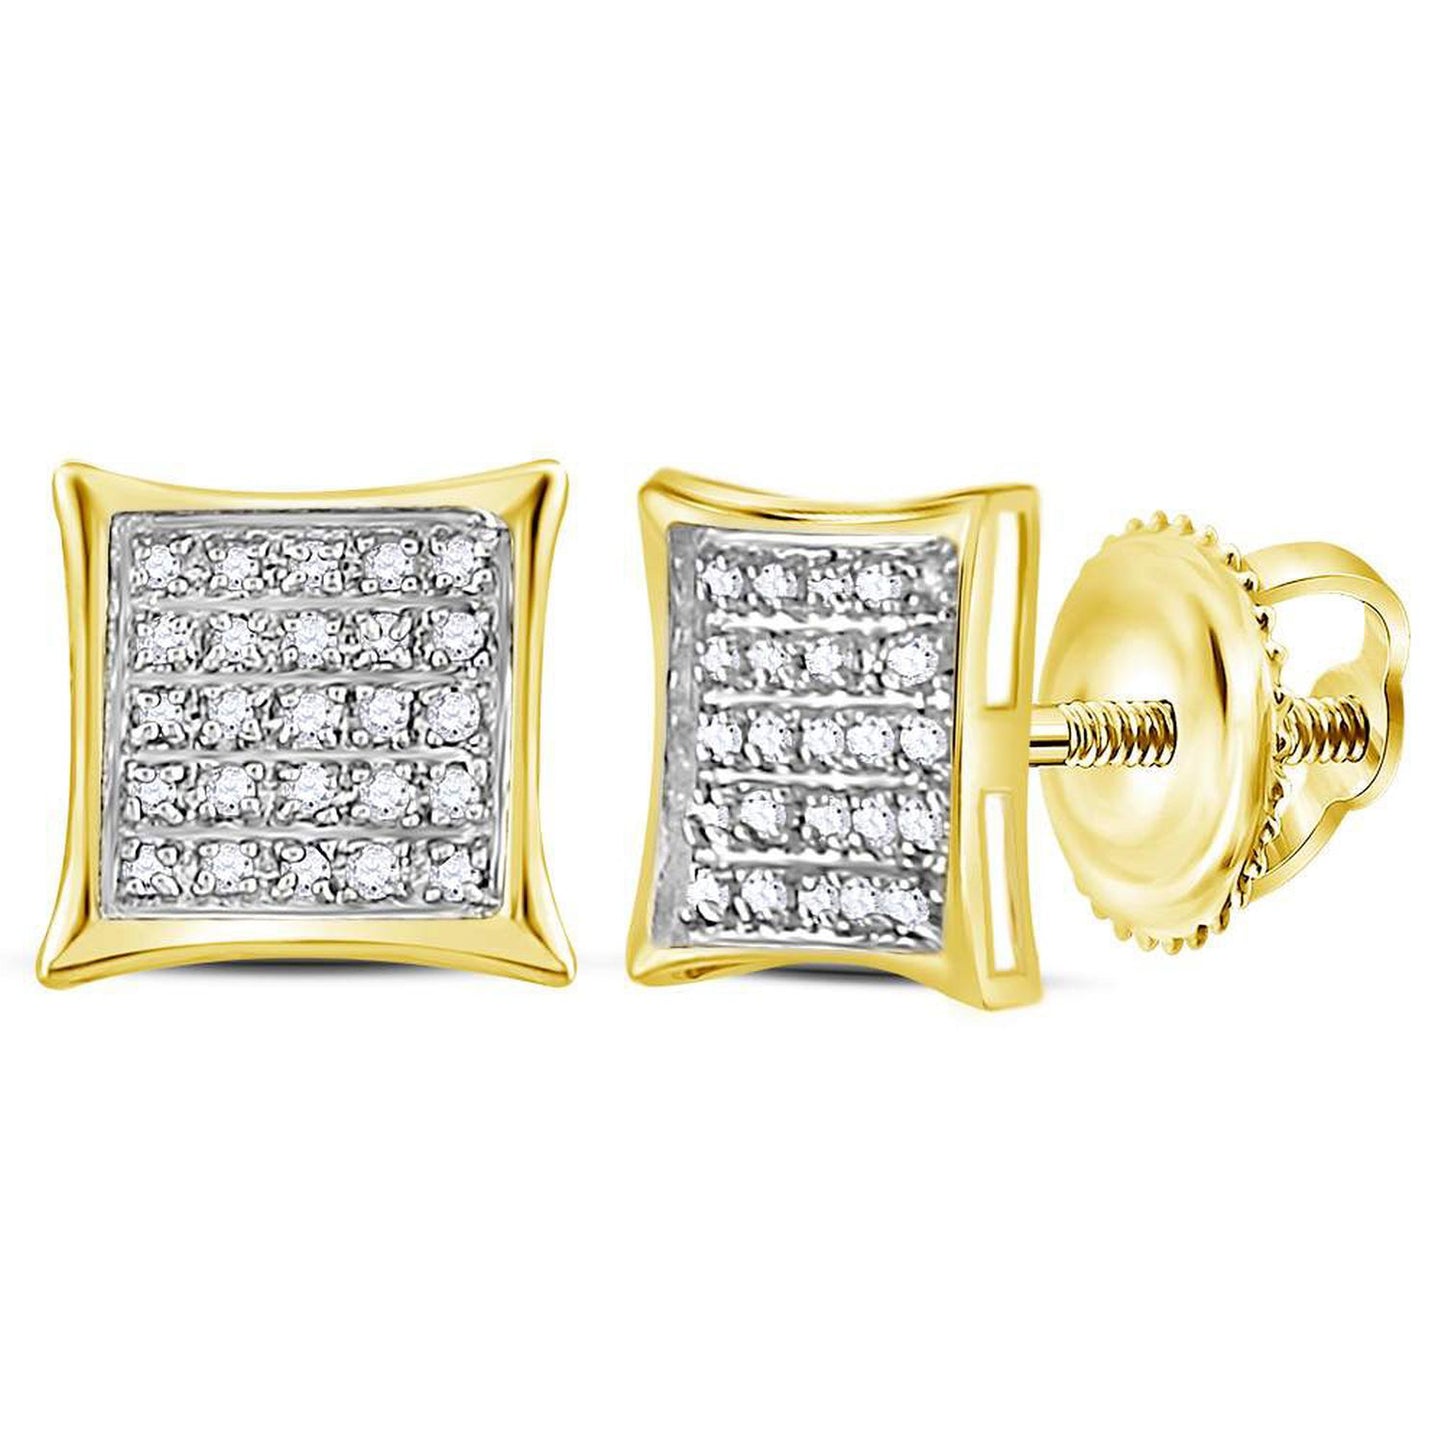 GND 10kt Yellow Gold Womens Round Diamond Square Kite Cluster Earrings 1/6 Cttw